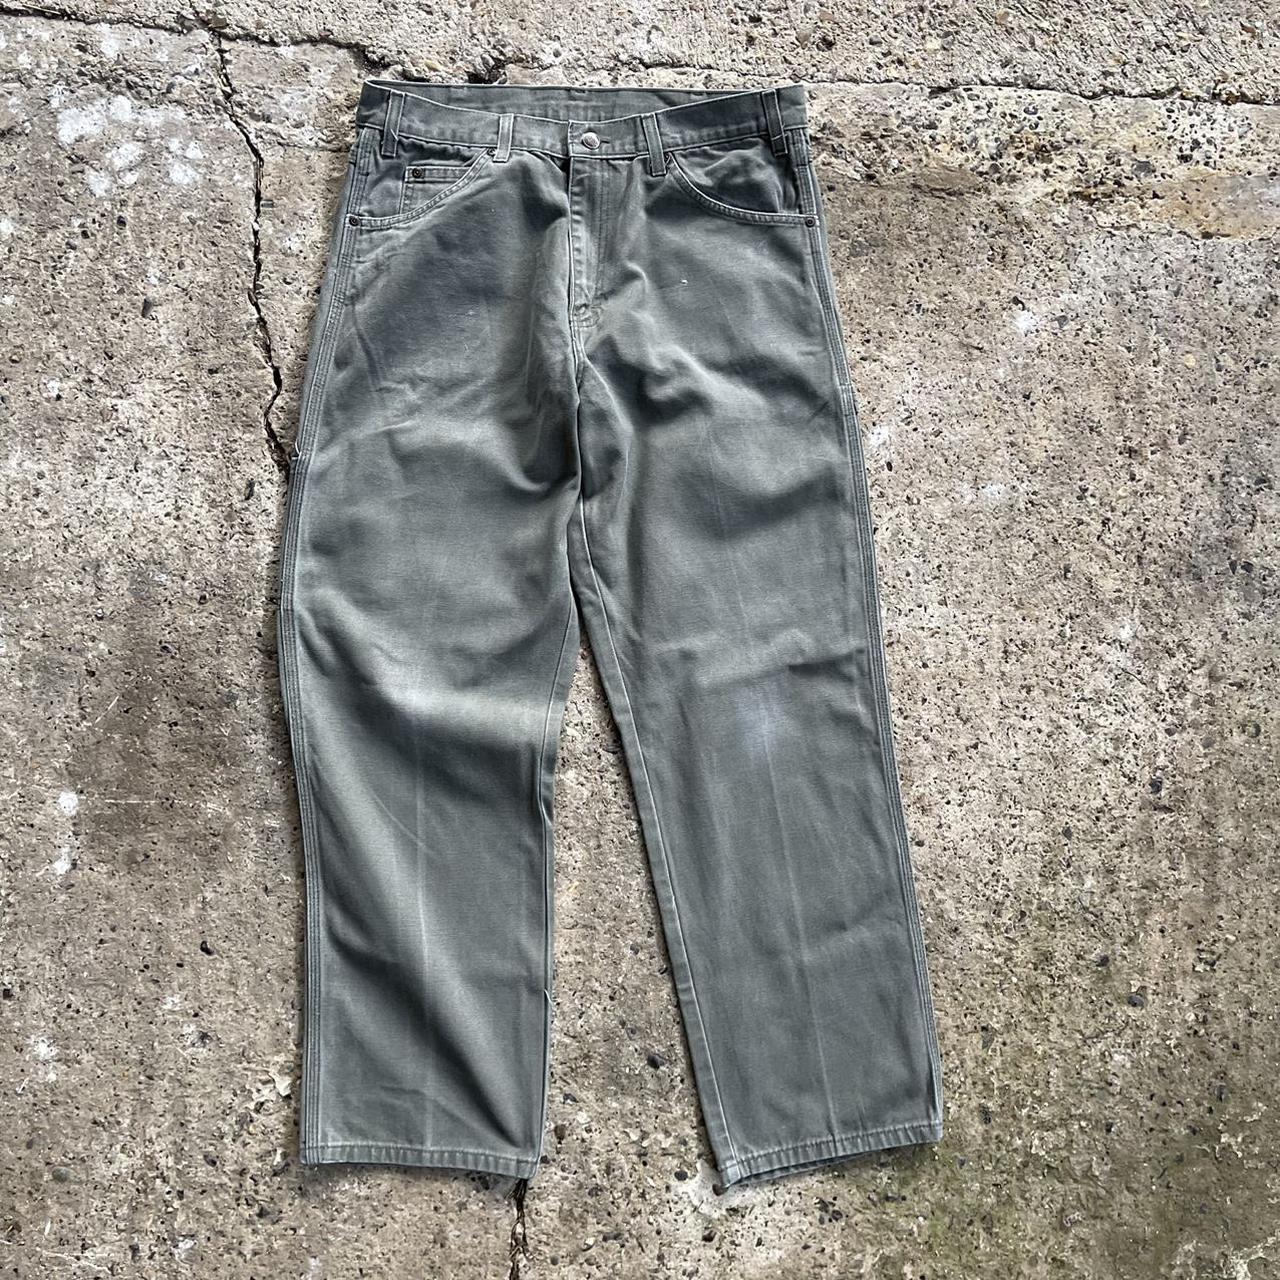 Product Image 2 - Vintage dickies Carpenter Trousers

Faded green